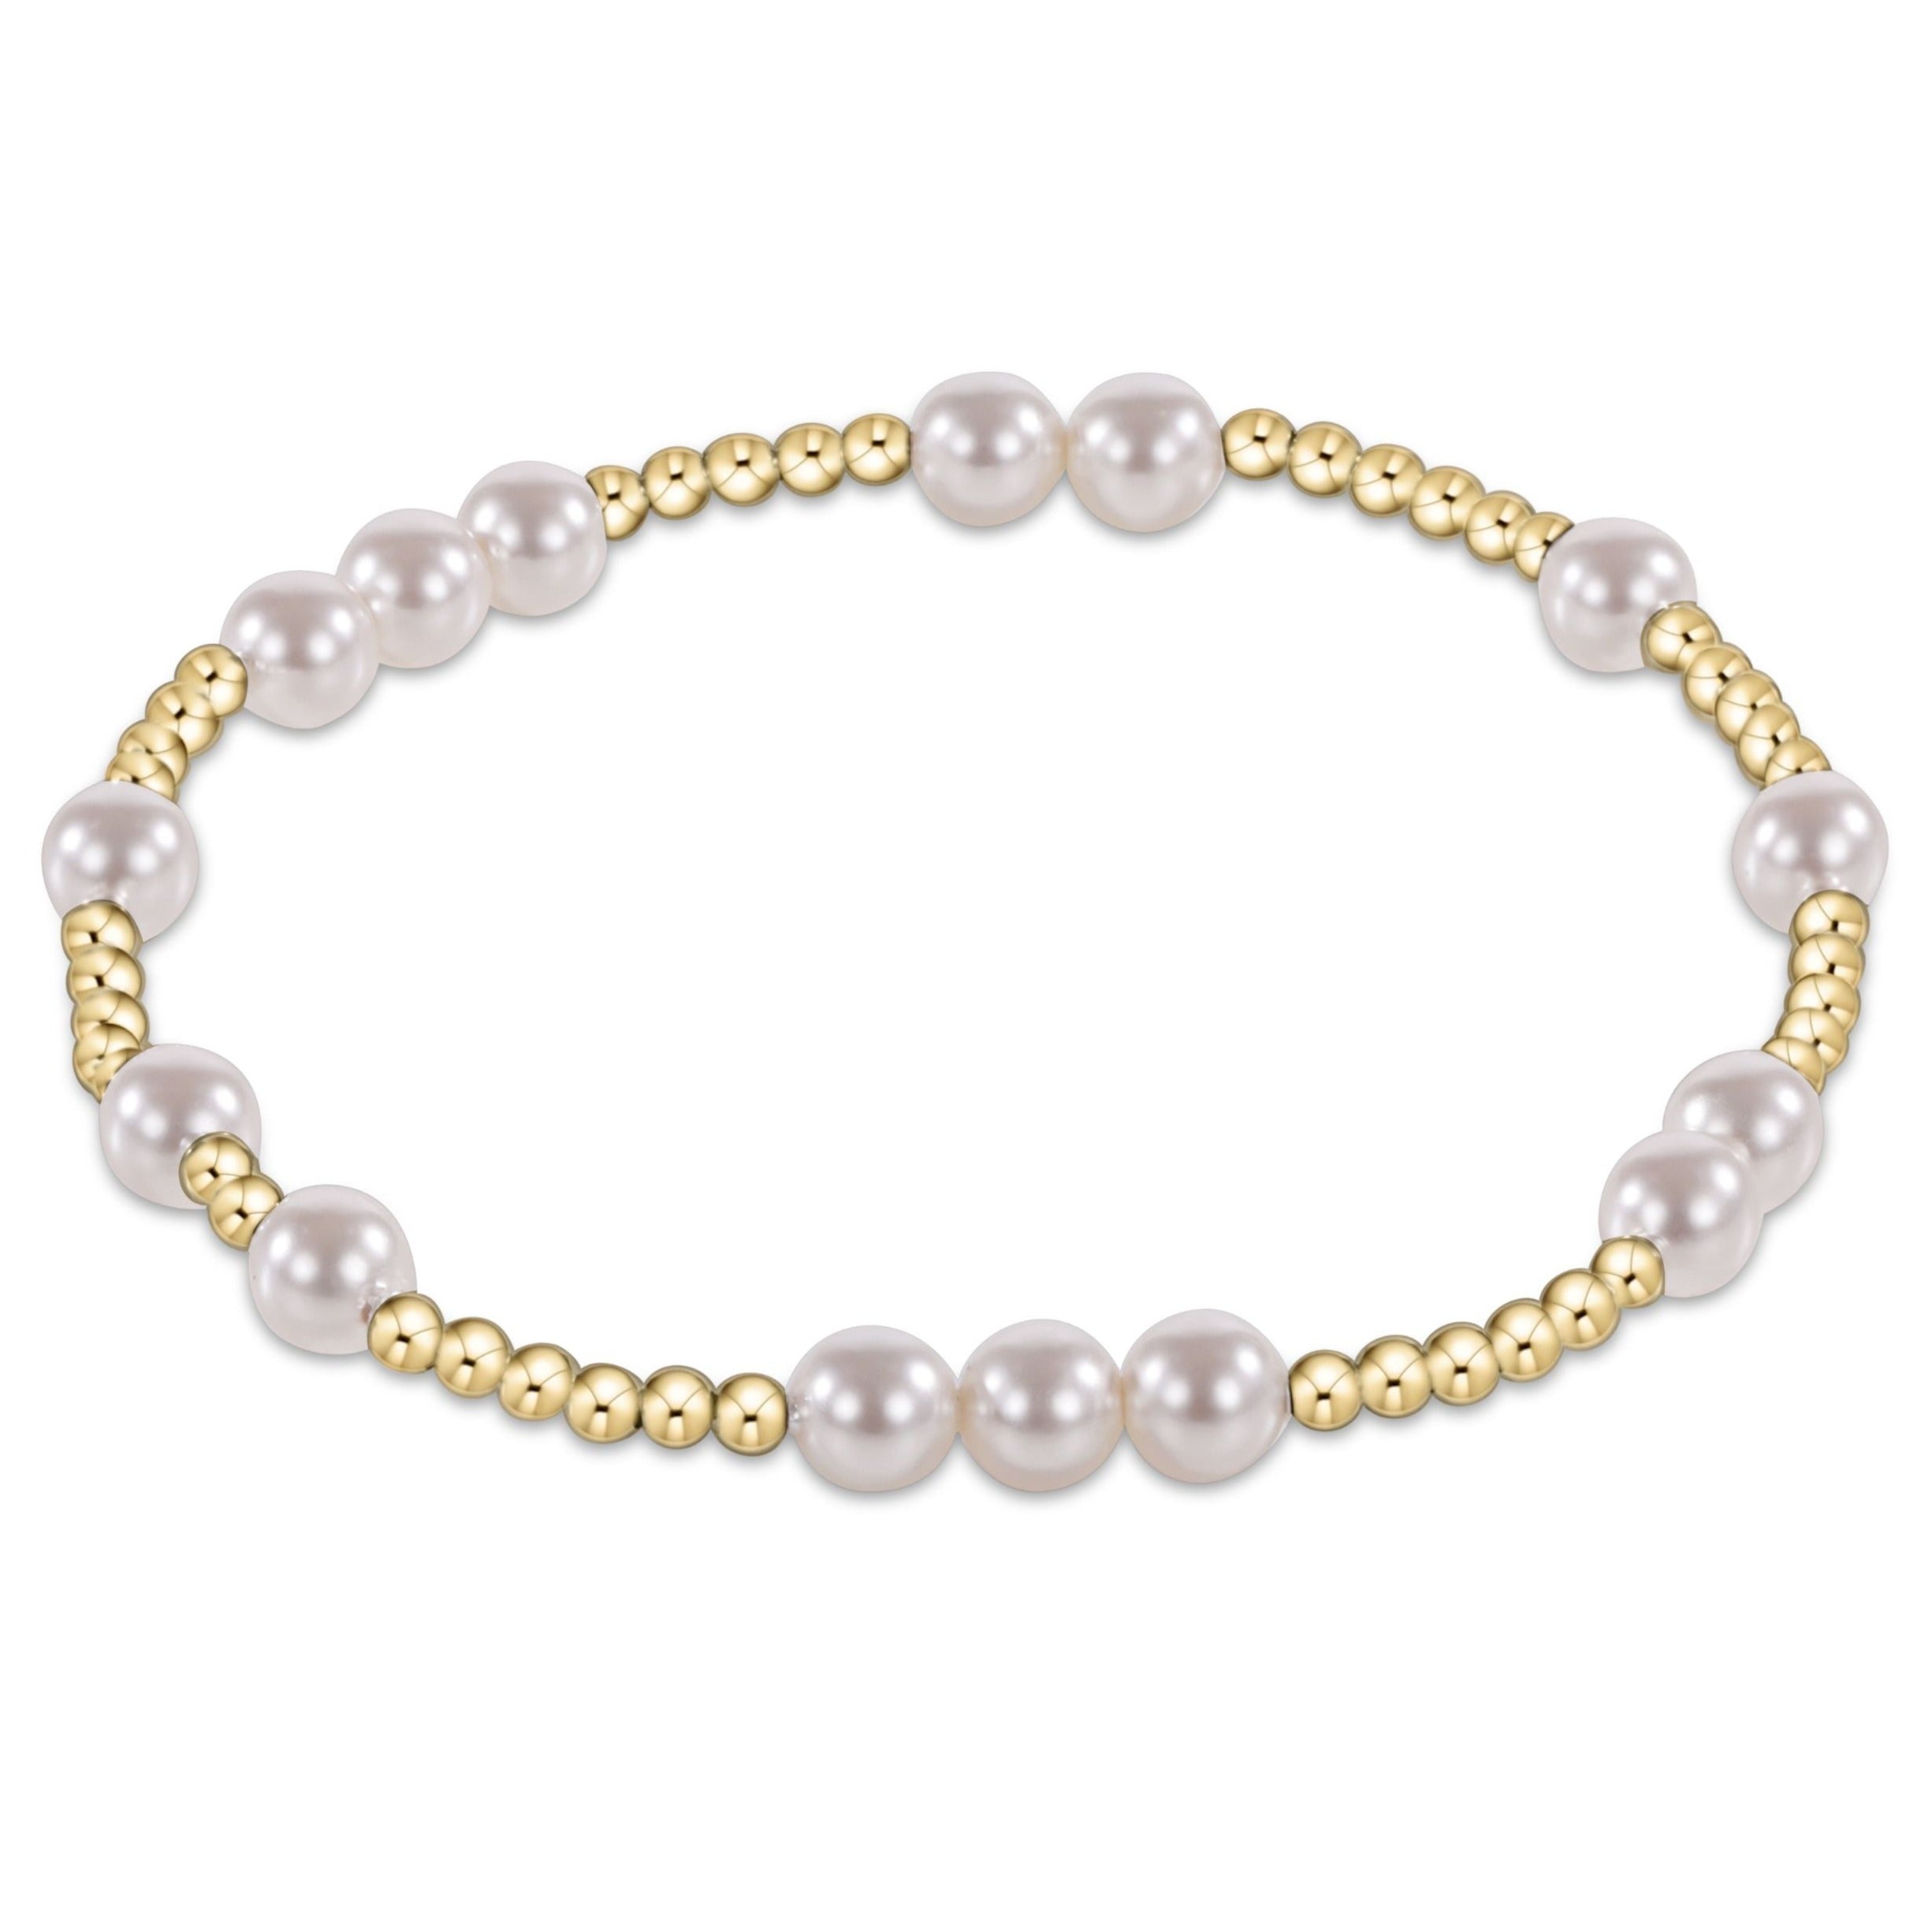 Pearl Bracelet Featuring An Elastic Stretch Band .75 Inches Wide, 5mm Pearls  | eBay